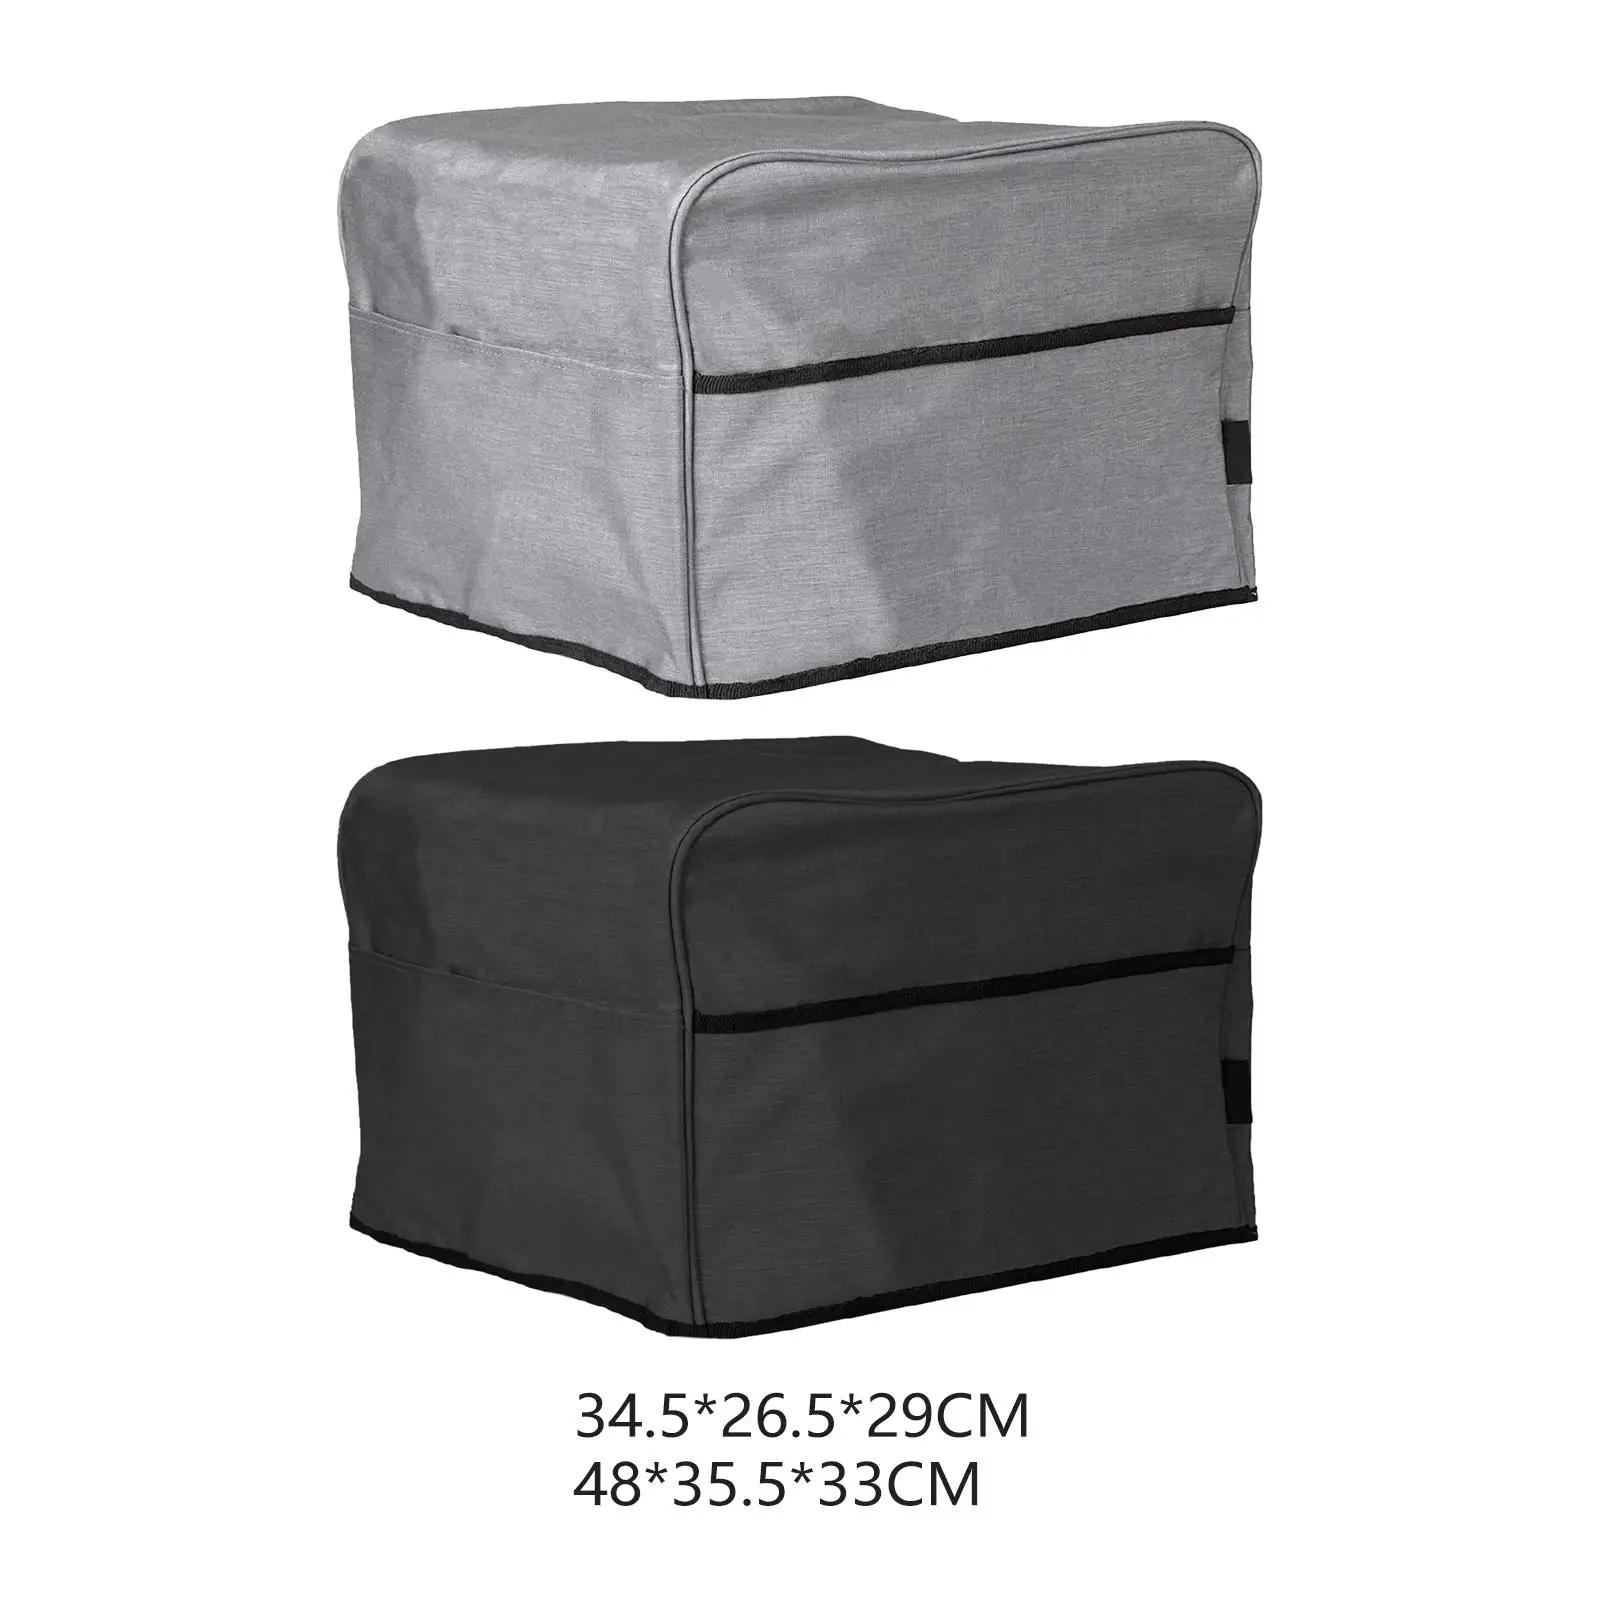 Small Appliance Dust Cover Air Fryer Appliance Cover for Air Fryer Appliance